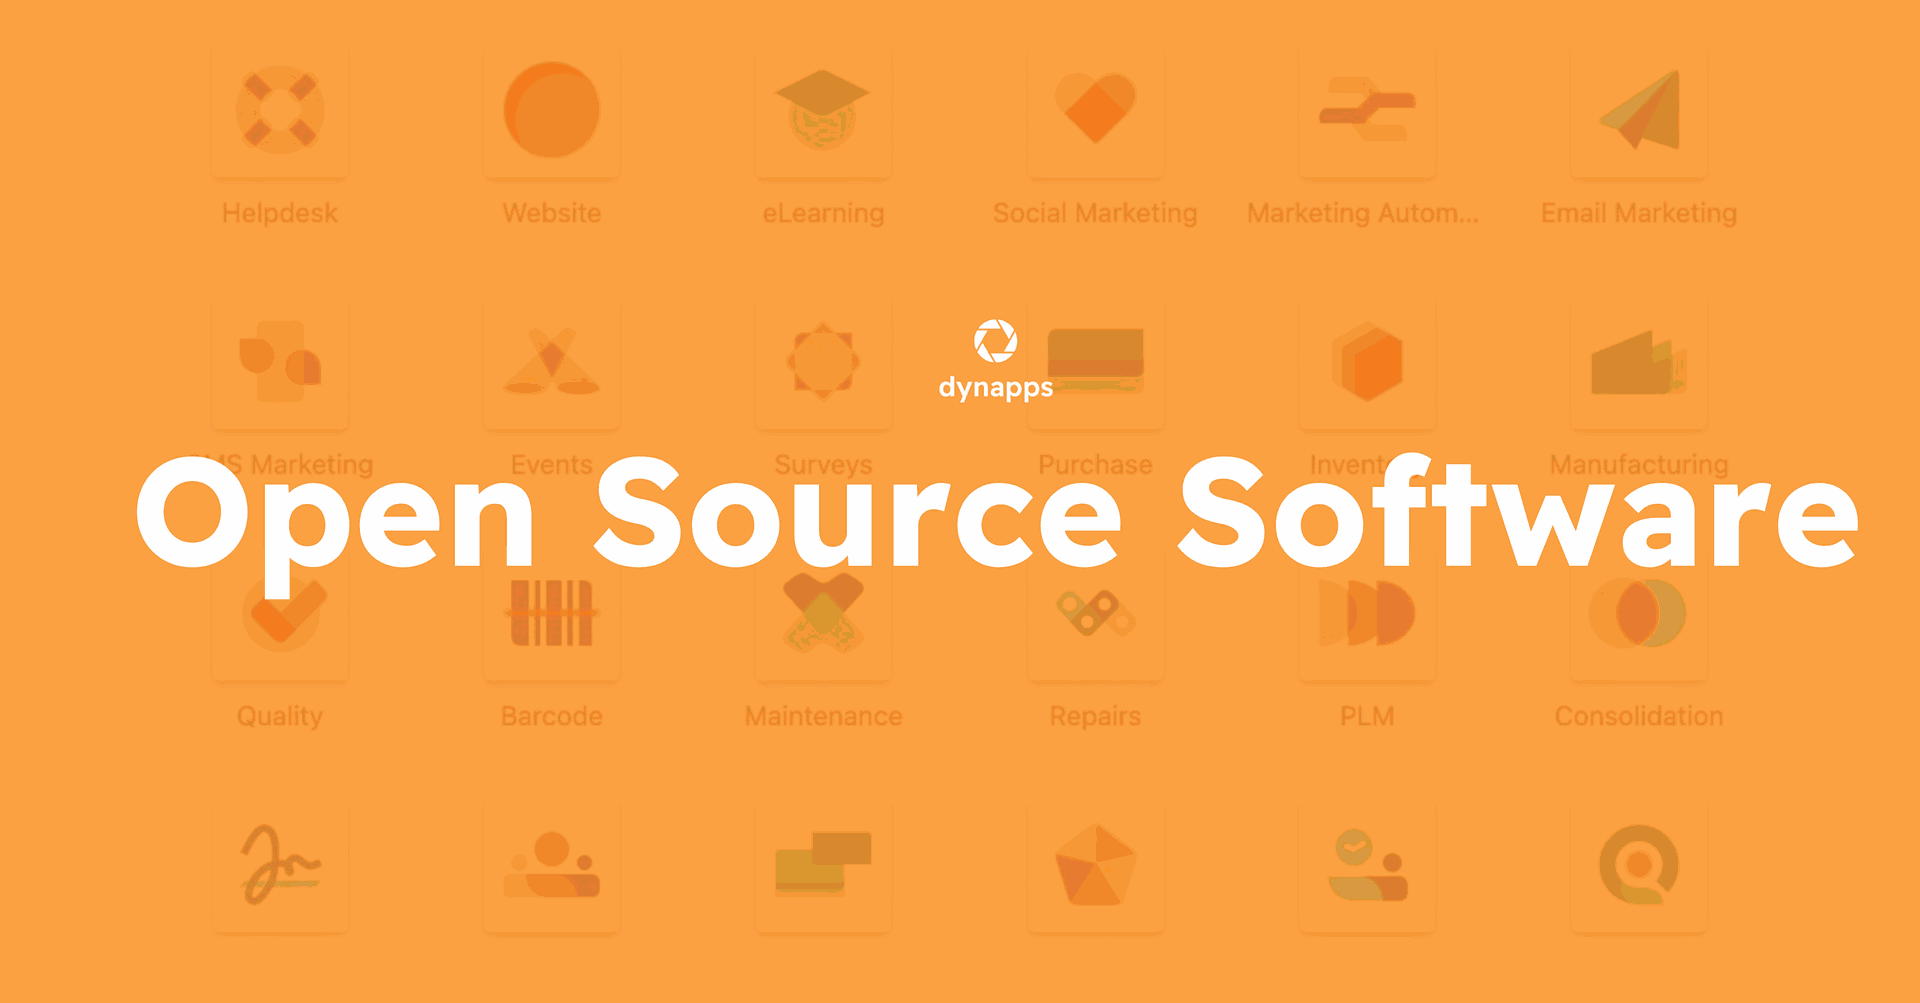 Open Source Software: The benefits of Odoo